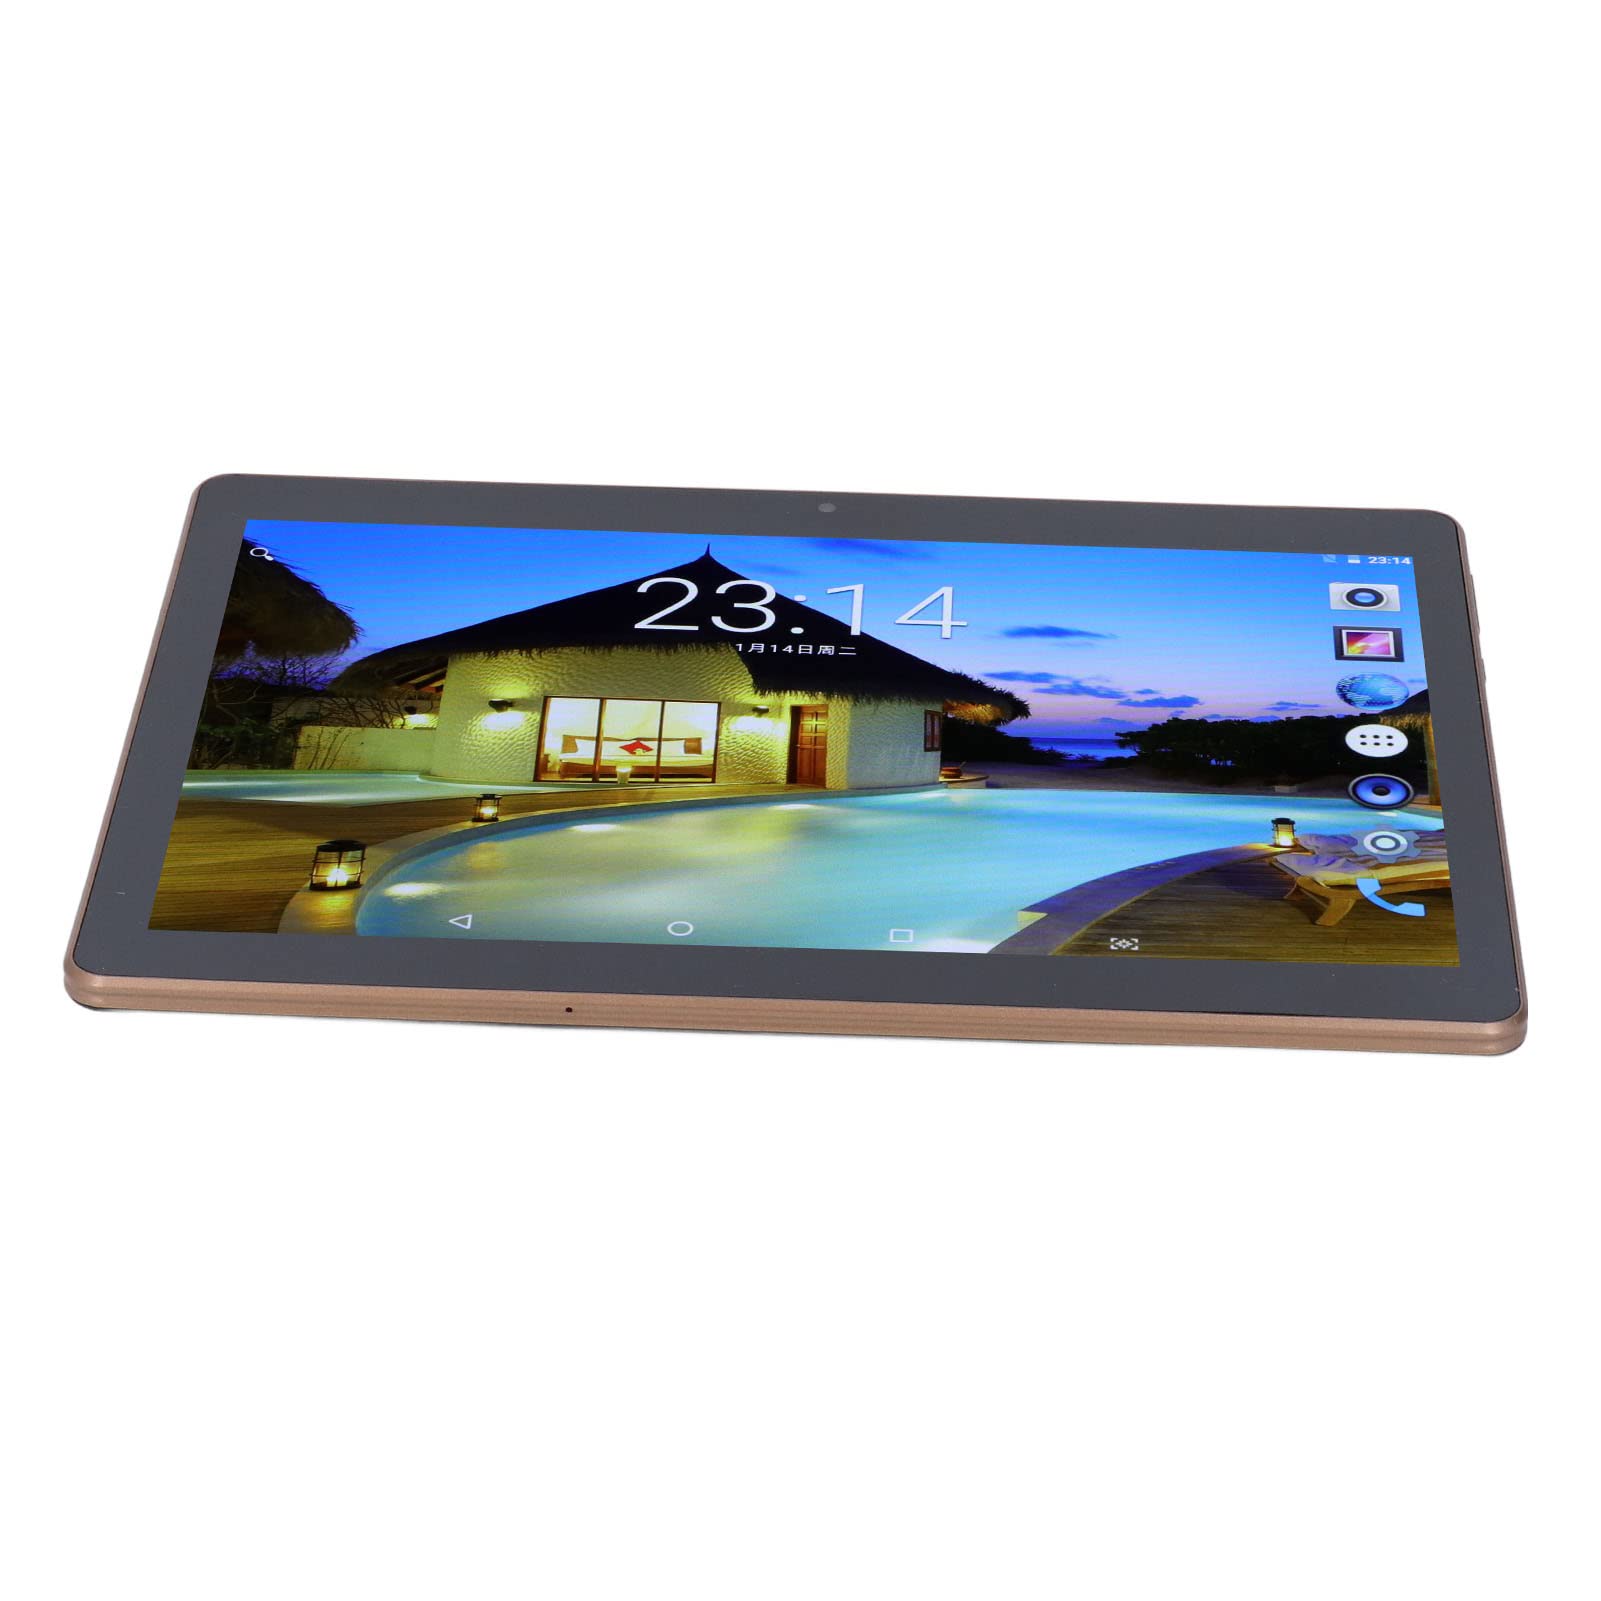 Smart Tablet 0.3MP Front 2MP Rear HD IPS Screen Octa Core Tablet Gold CNC Edge High Gloss Body 5500mAh with USB Cable for Daily Use (US Plug)